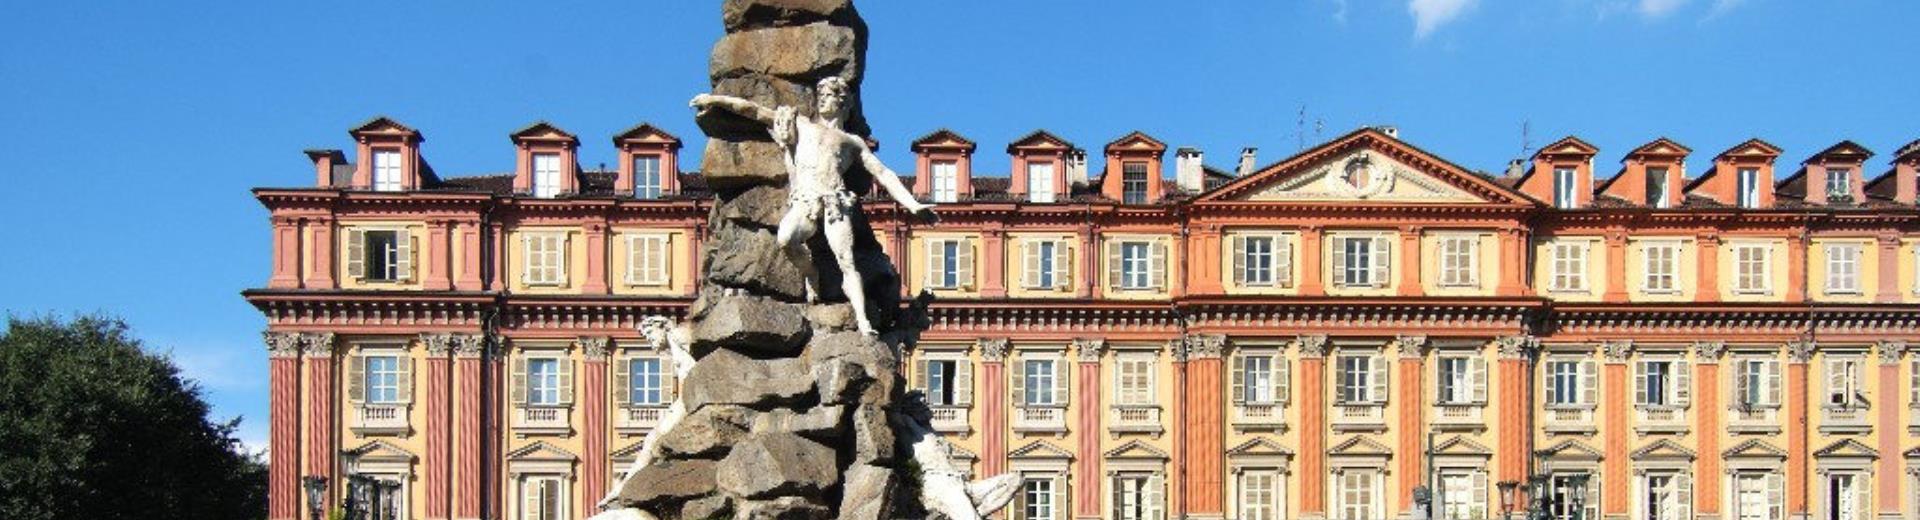 Discover the charm of Turin, the city of magic with the Best Western Plus Hotel Le Rondini. A special offer, created especially for you.